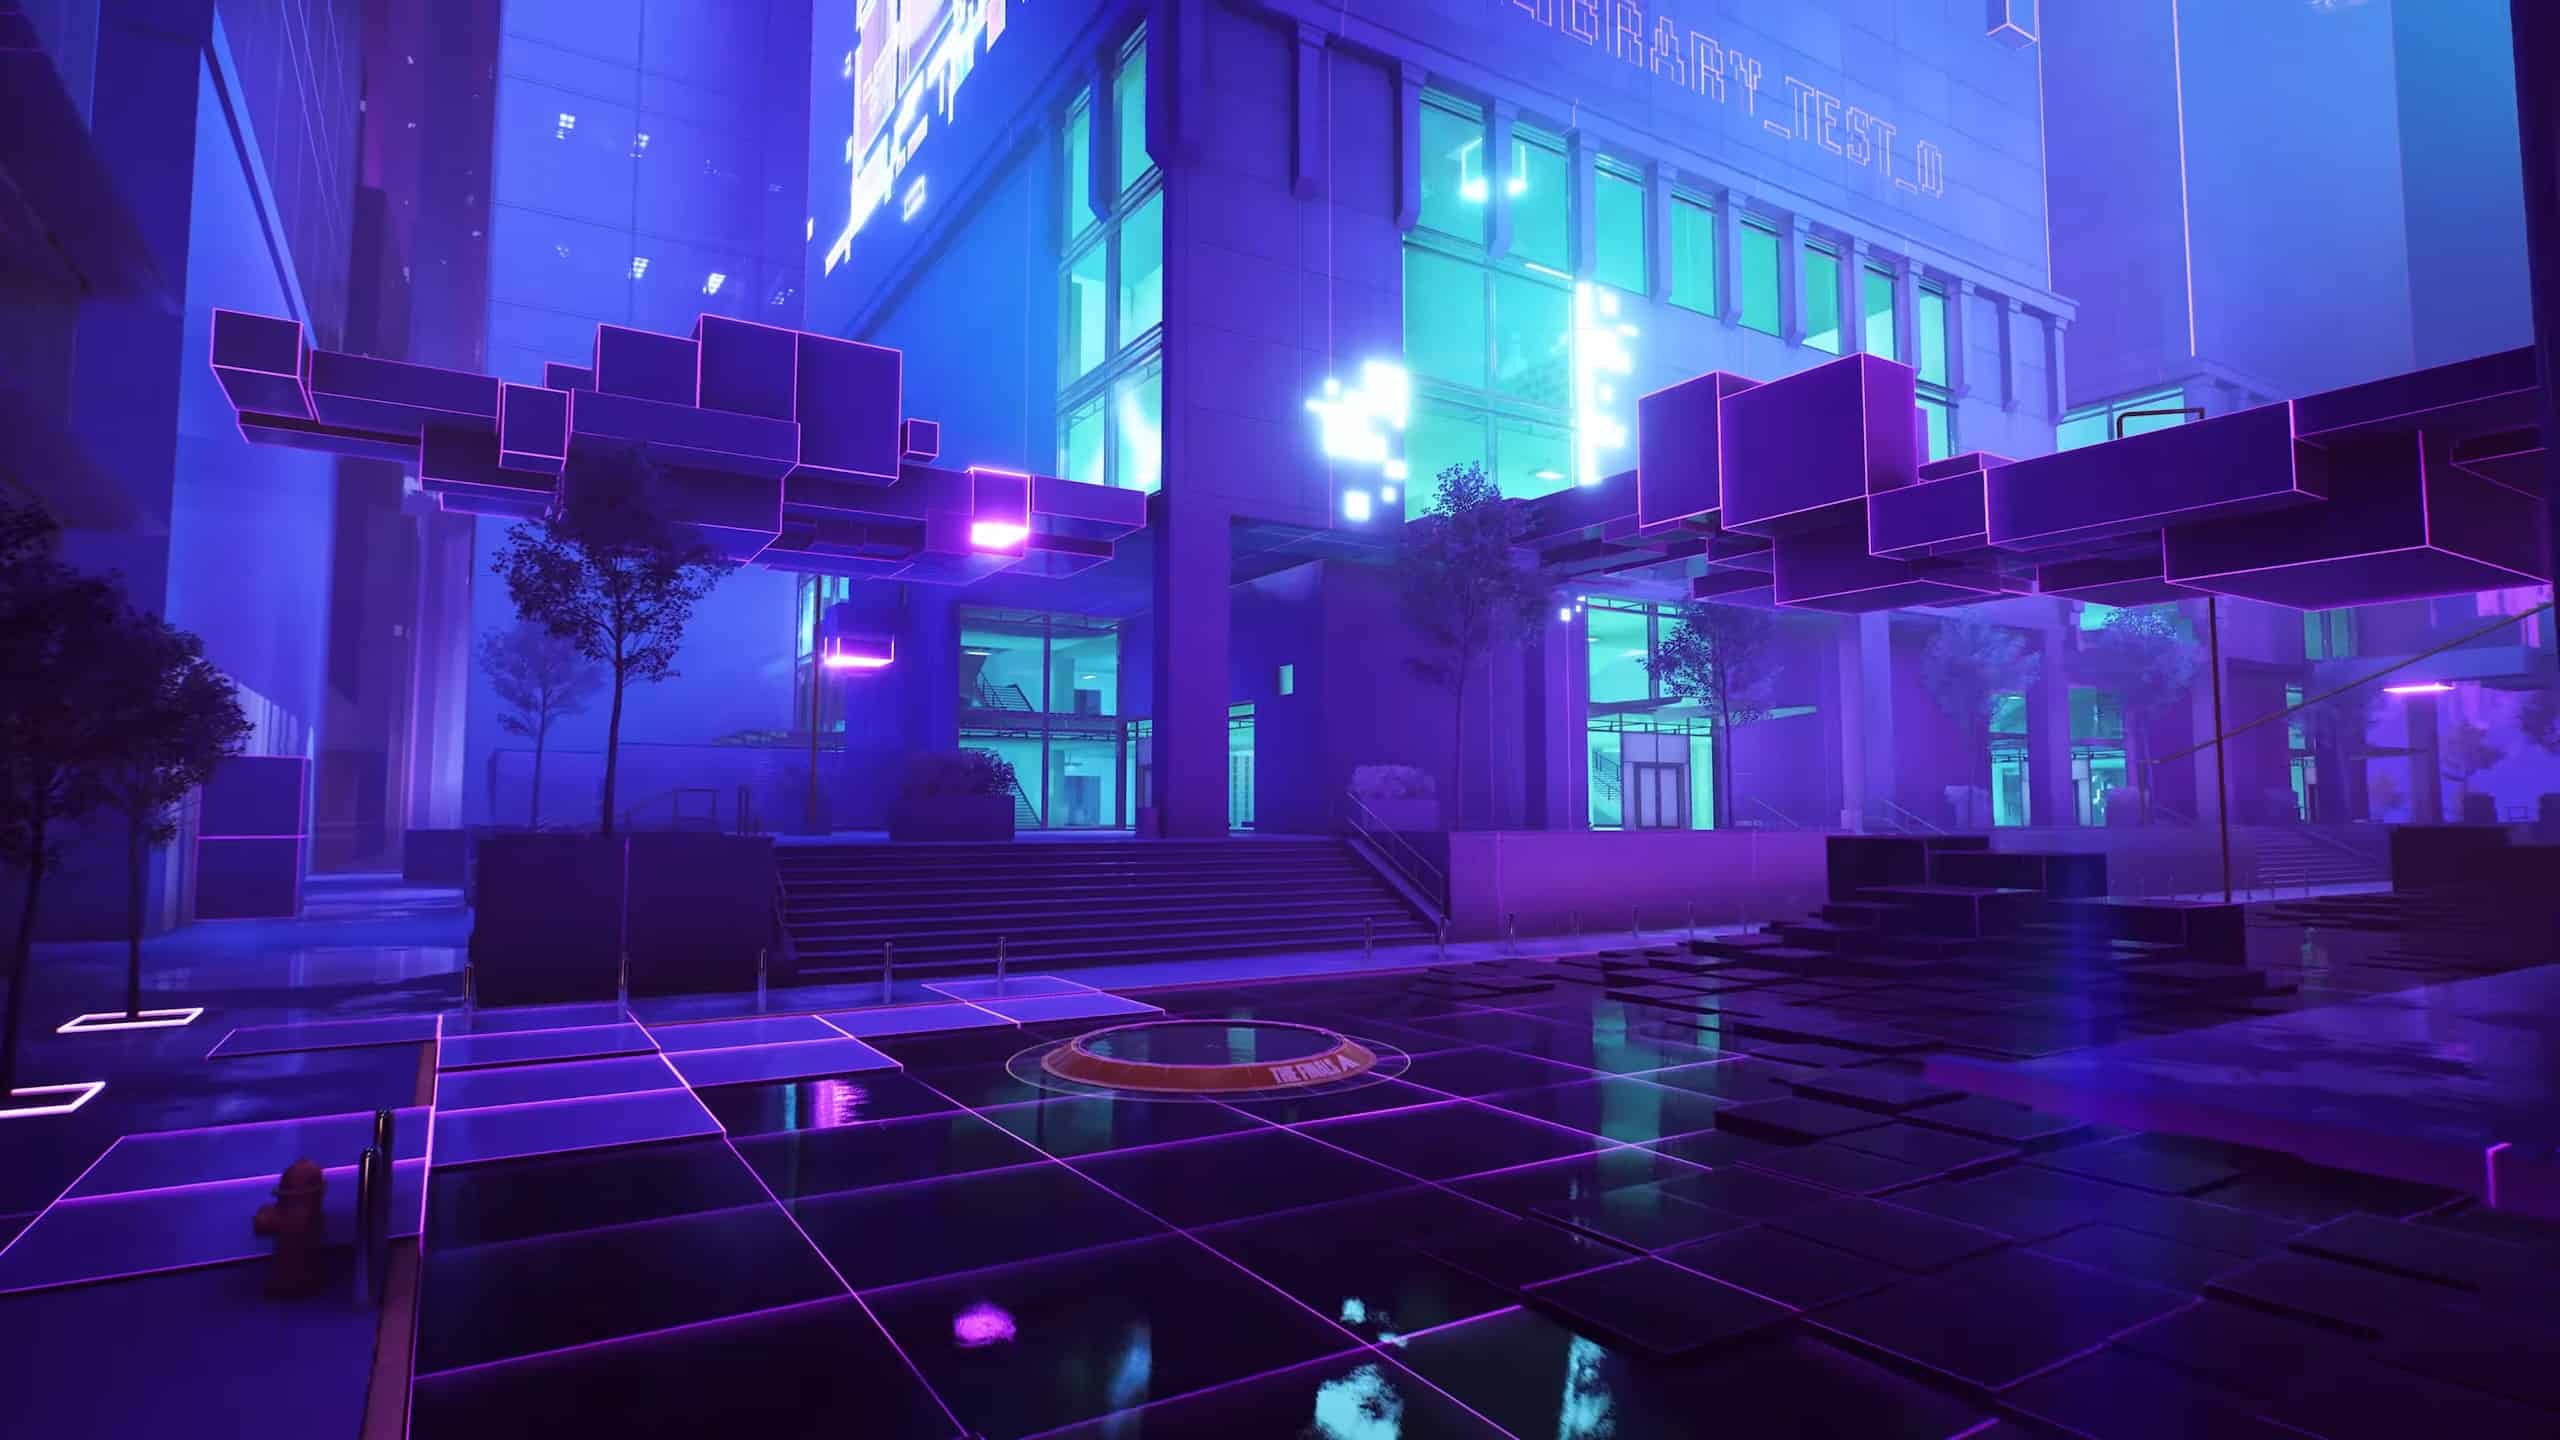 The Finals Season 2 start date: A city block with a vaporwave aesthetic.